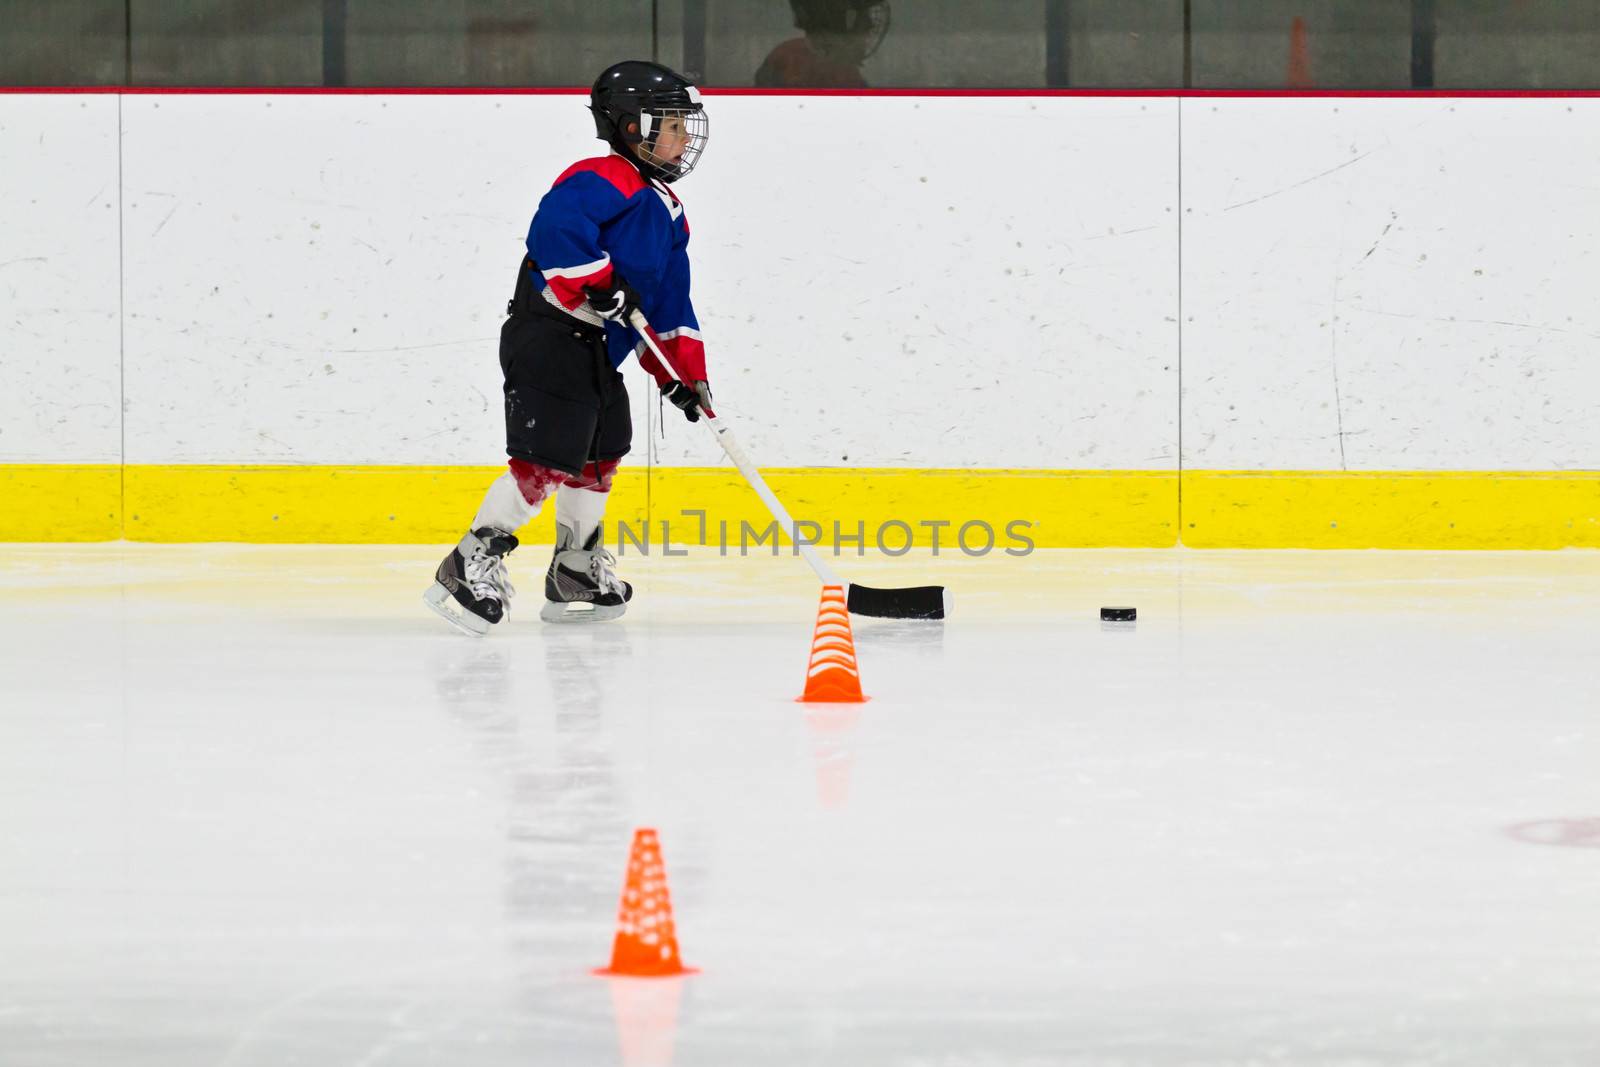 Child practices stickhandling at ice hockey practice by bigjohn36